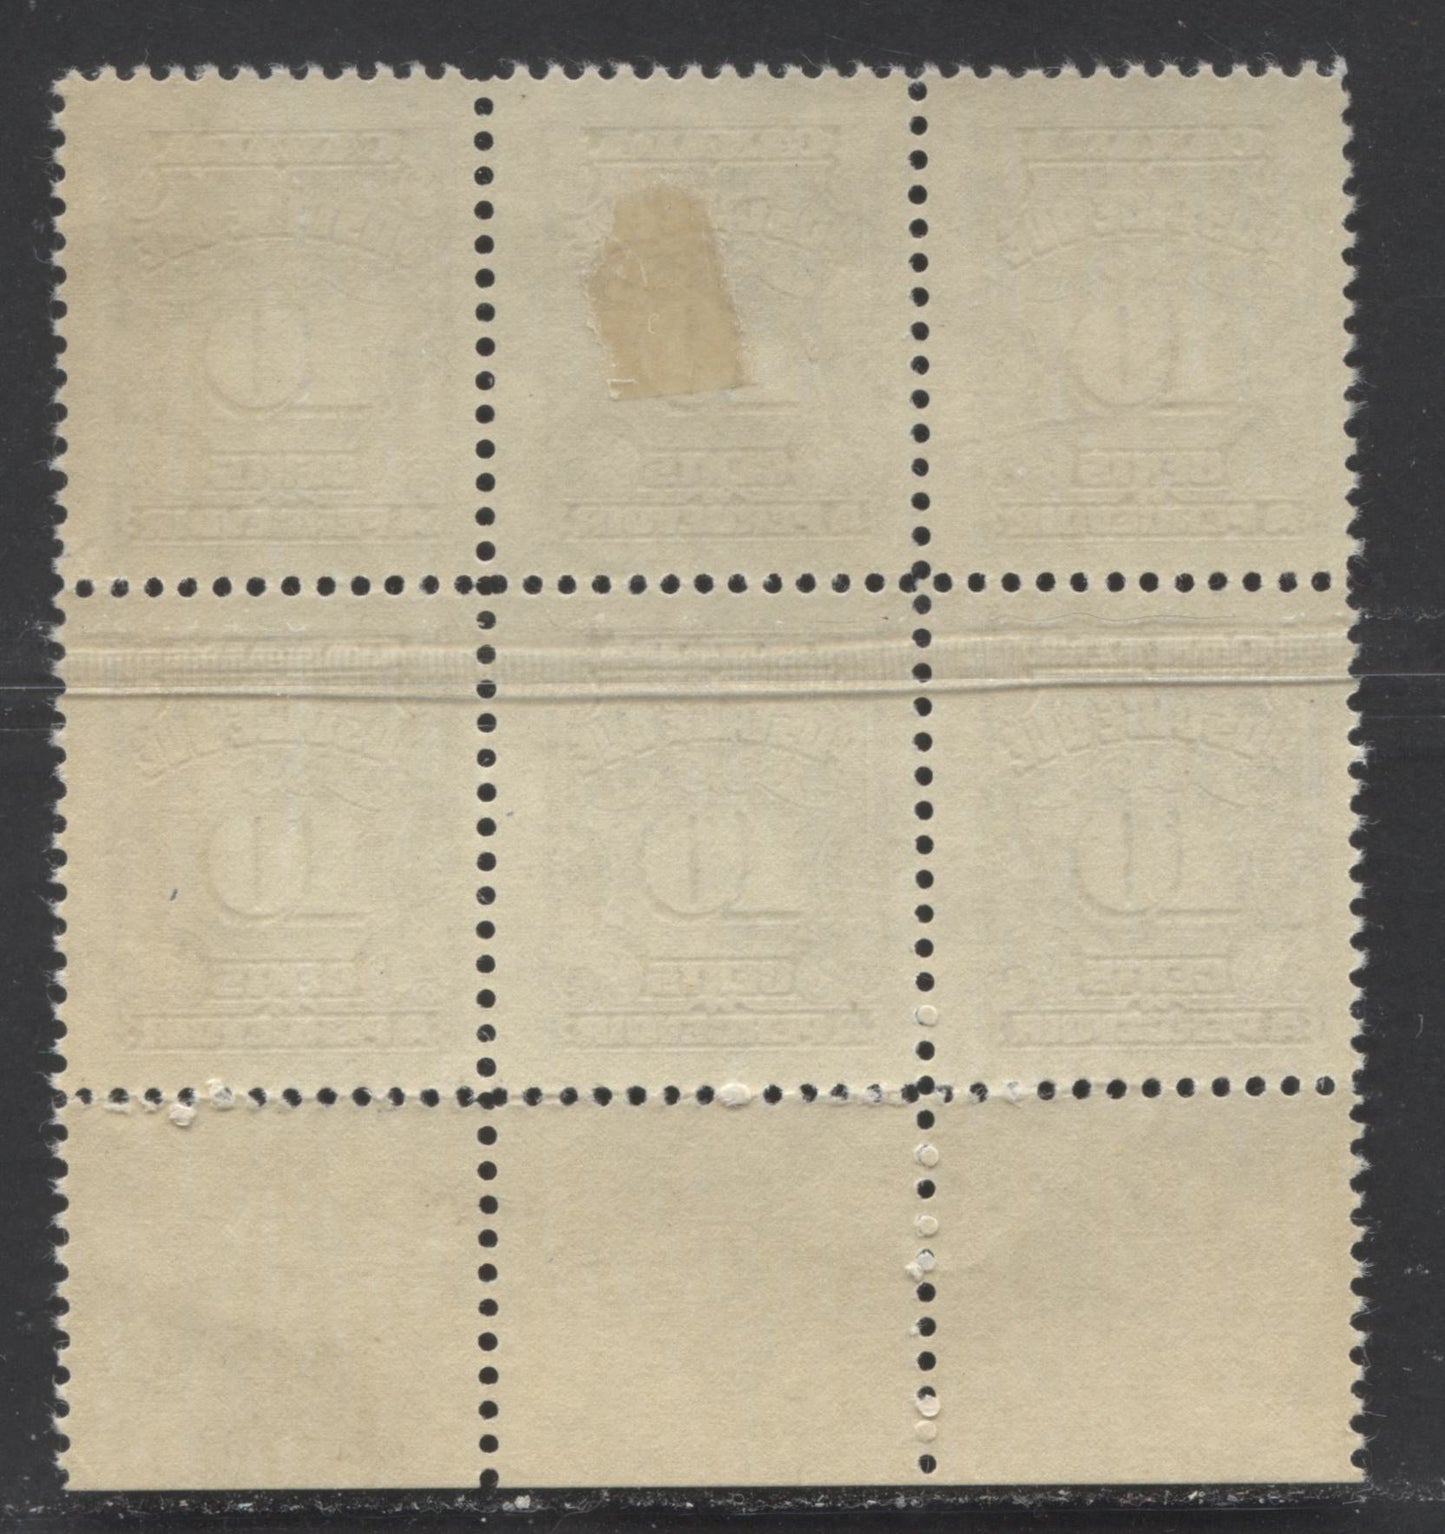 Lot 94 Canada #J20b 10c Red Violet, 1935-1965 Fourth Postage Due Issue, A FOG Lower Plate 1 Block Of 6 On Horizontal Wove Paper With Yellowish Cream Gum, Likely From Either Mufti Or War Issue Period